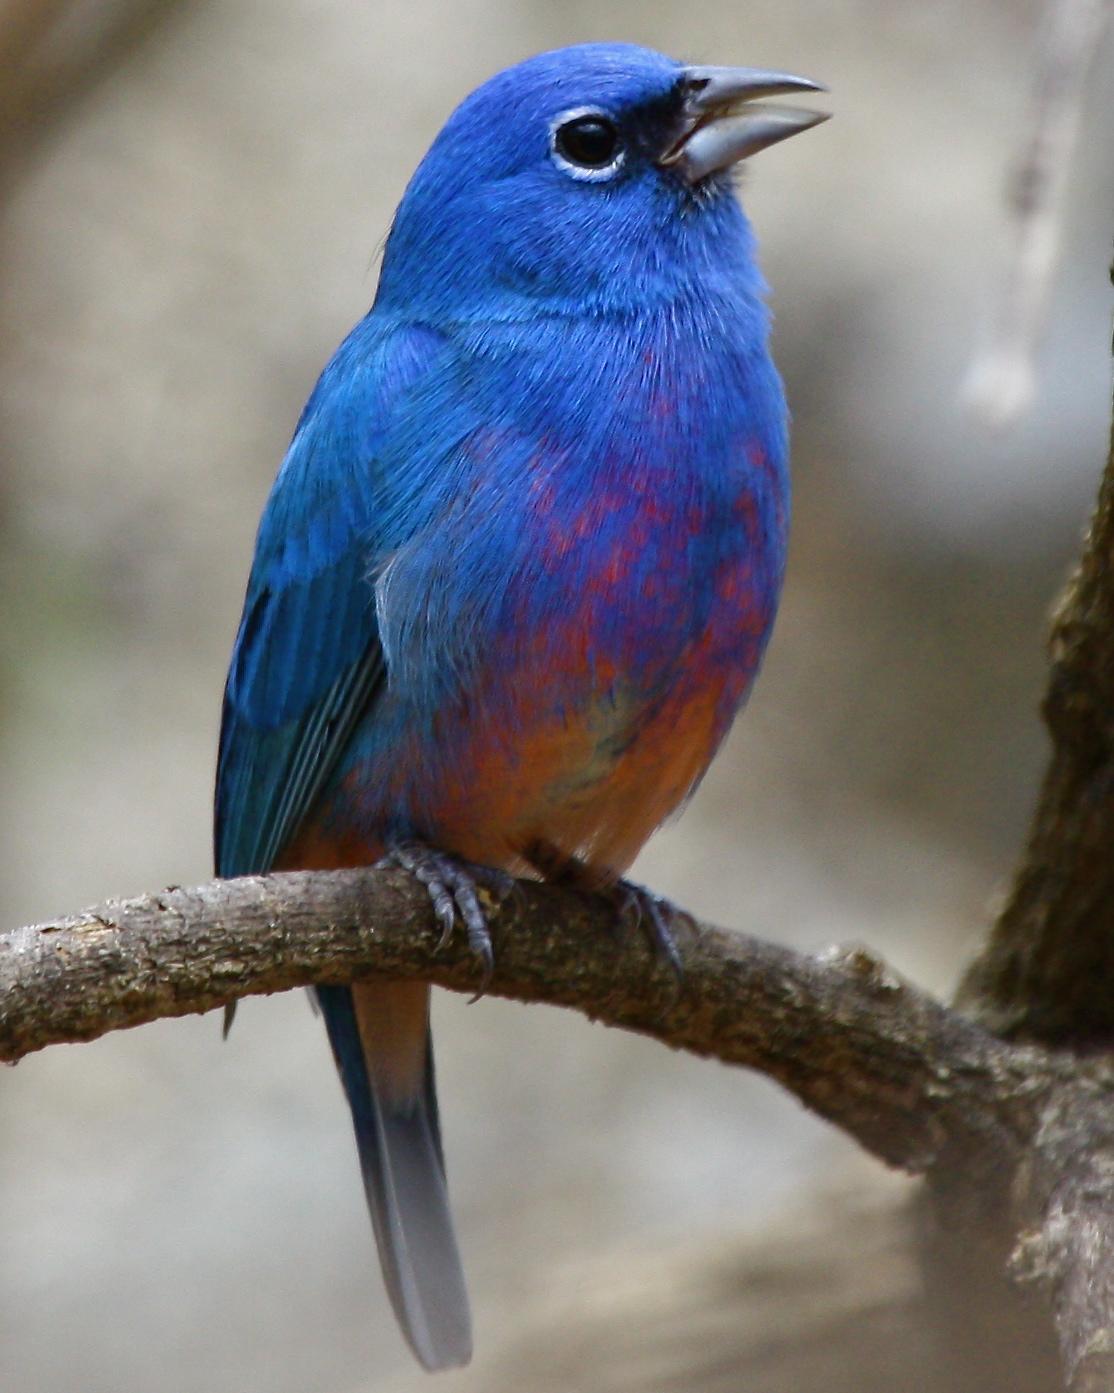 Rose-bellied Bunting Photo by Michael L. P. Retter